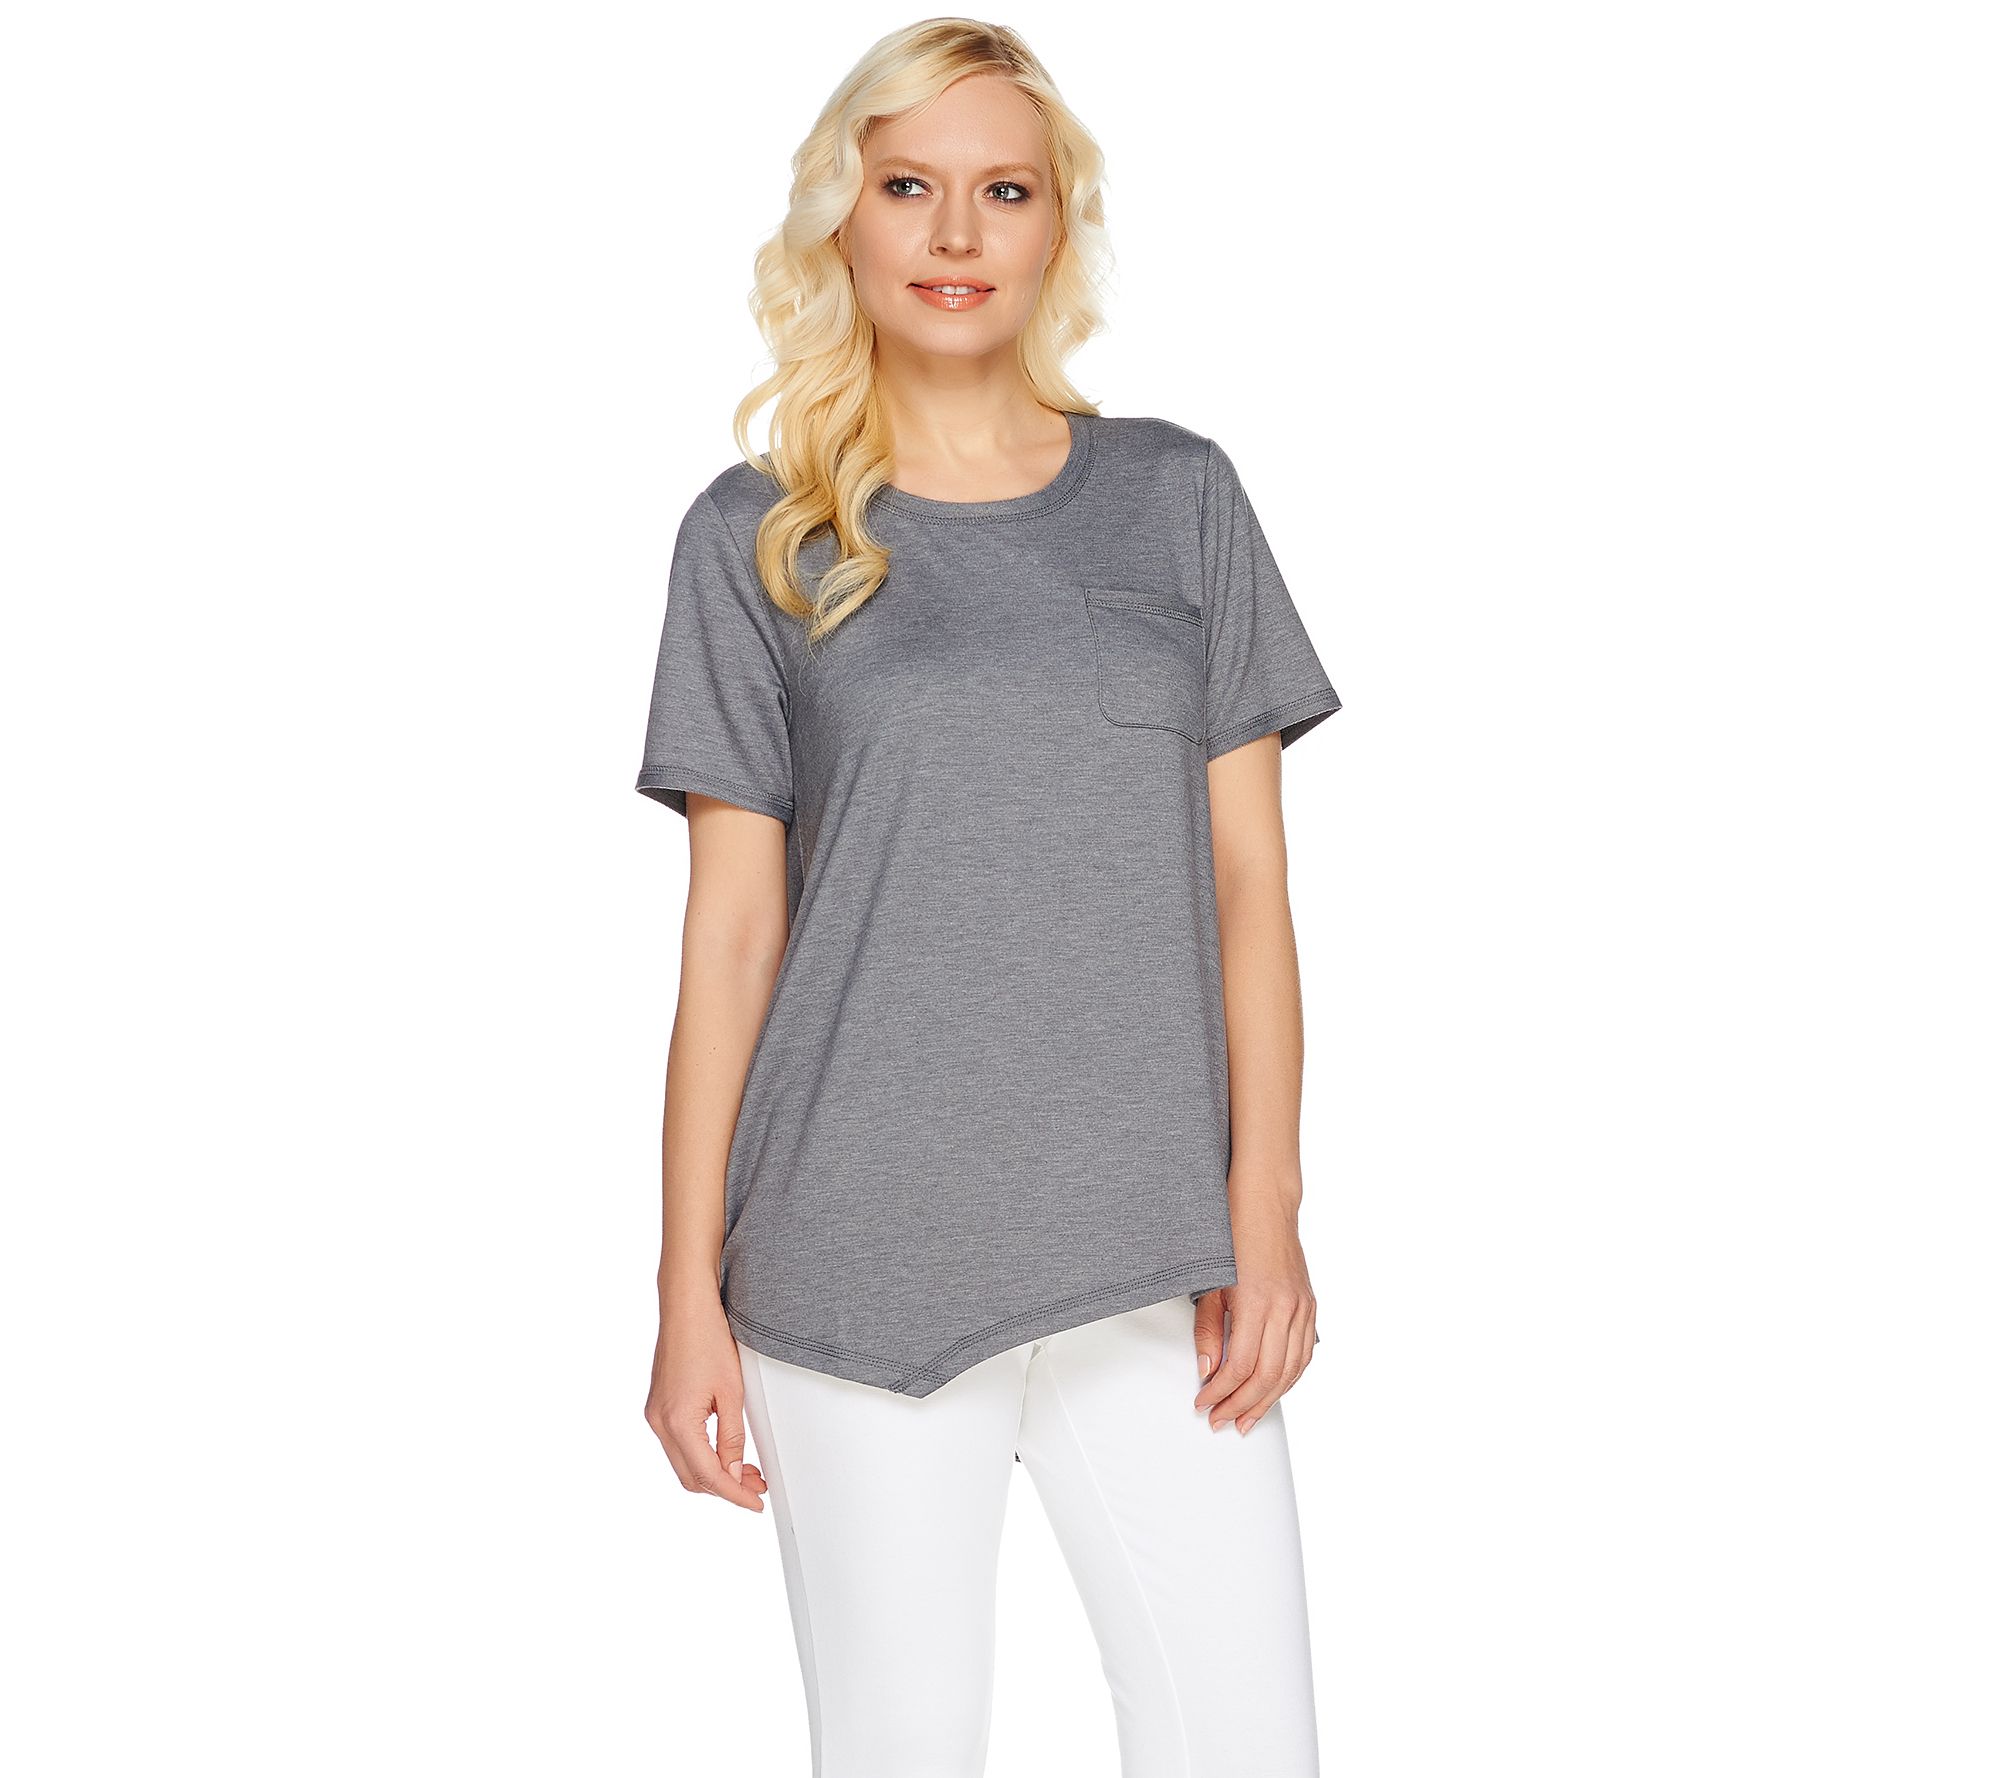 LOGO Lounge by Lori Goldstein French Terry Asymmetric Hem Top with ...